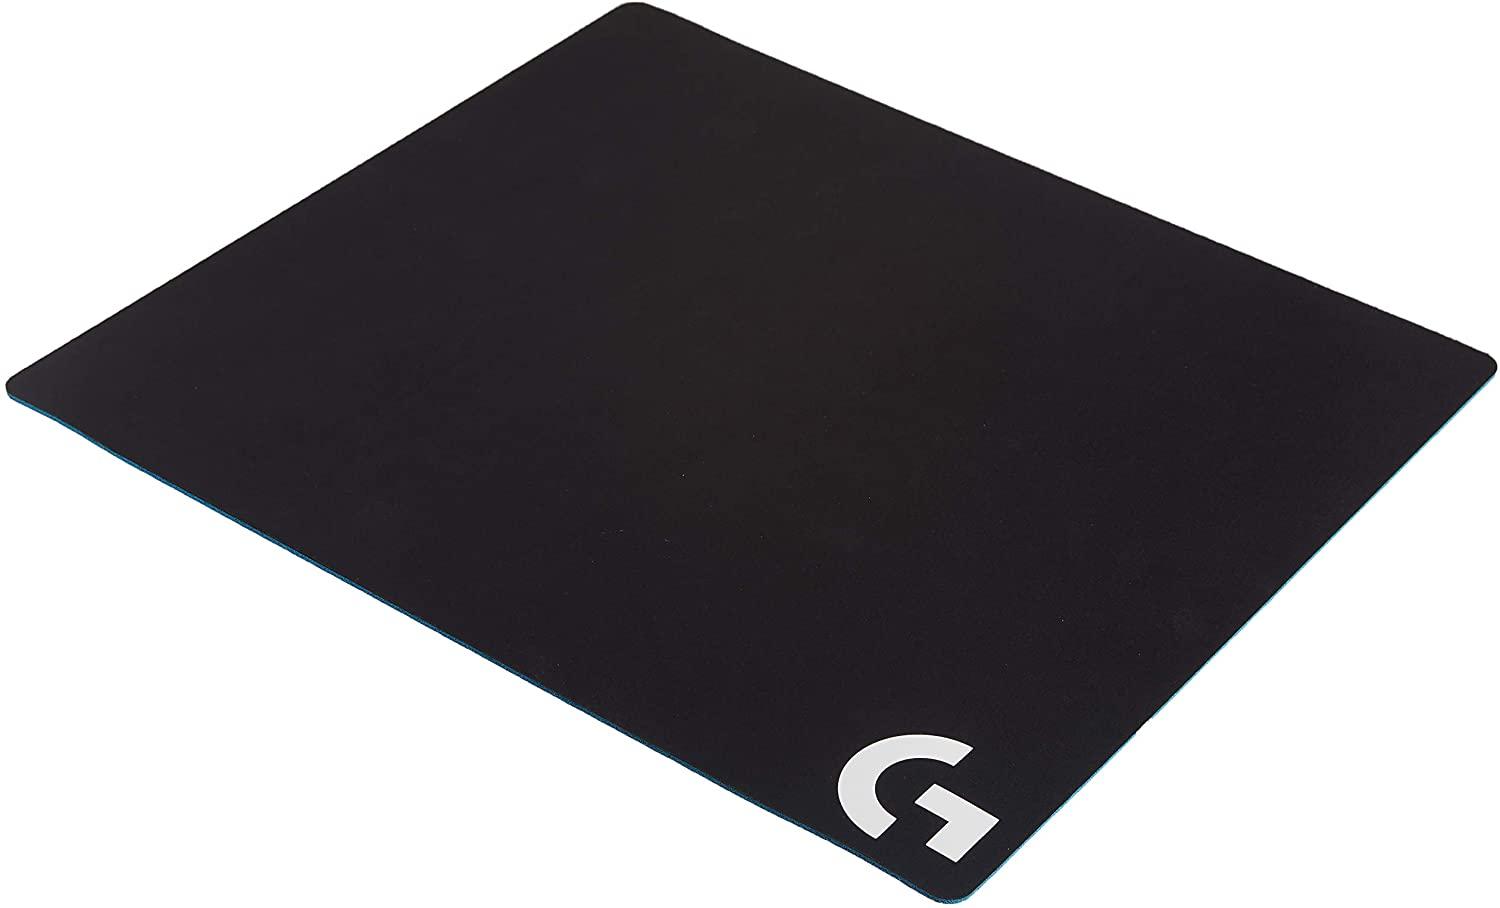 Logitech G640 Cloth Gaming Mouse Pad 